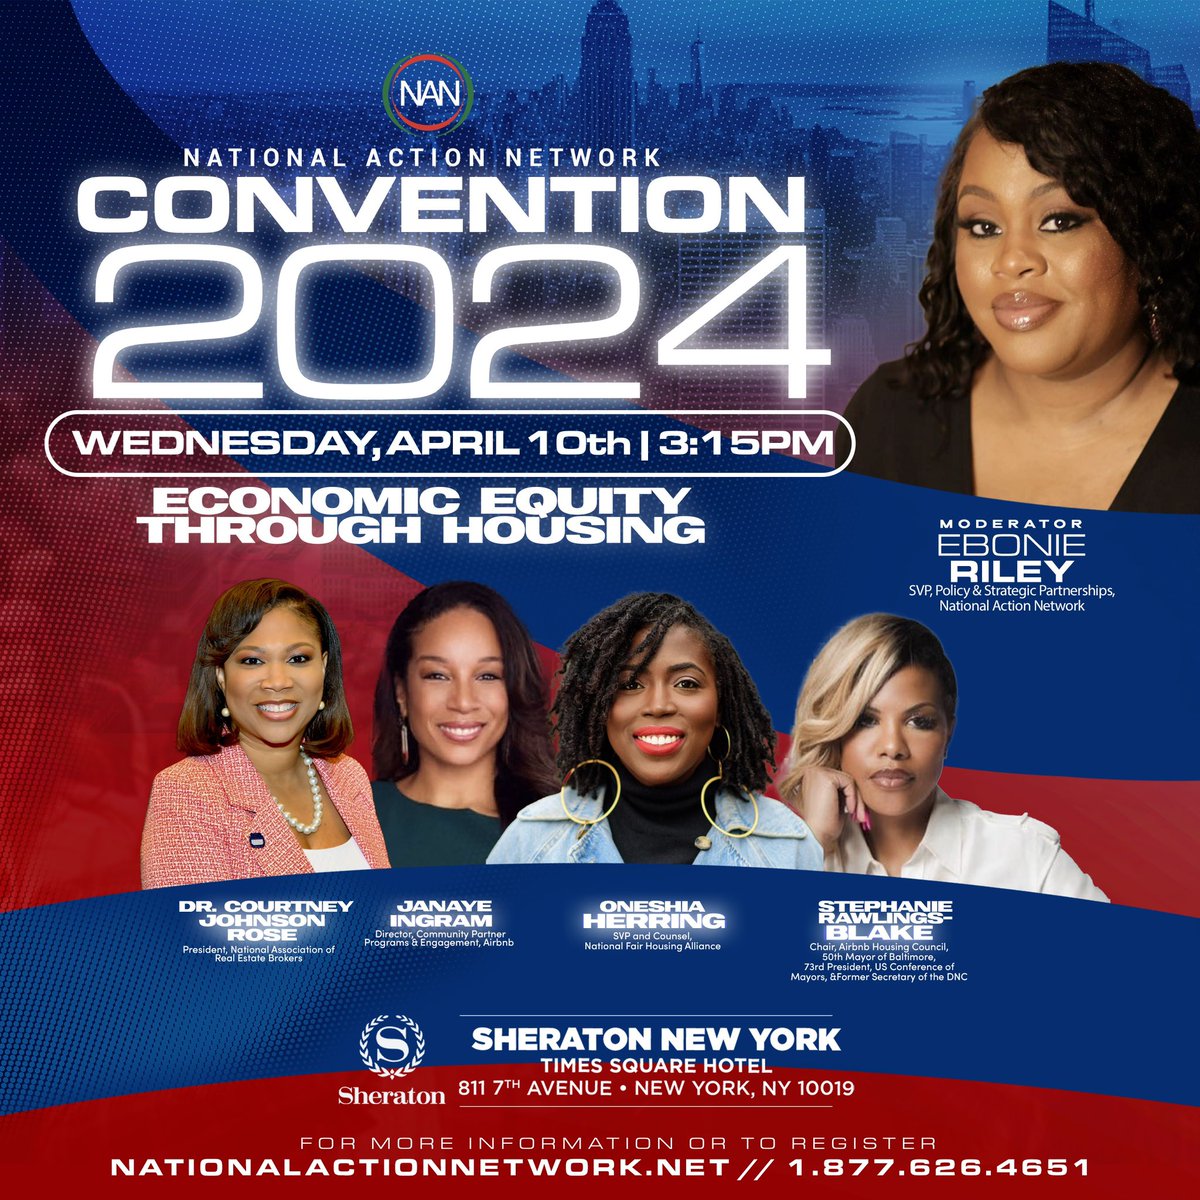 Don’t miss the National Action Network (NAN) 2024 Convention, April 10-13, beginning tomorrow. Join us for the ECONOMIC EQUITY THROUGH HOUSING panel 📅 April 10, 2024 ⏰3:15 PM 📍 Location: @sheratontimessq Register today at NANCONVENTION2024.com #NANCONV2024